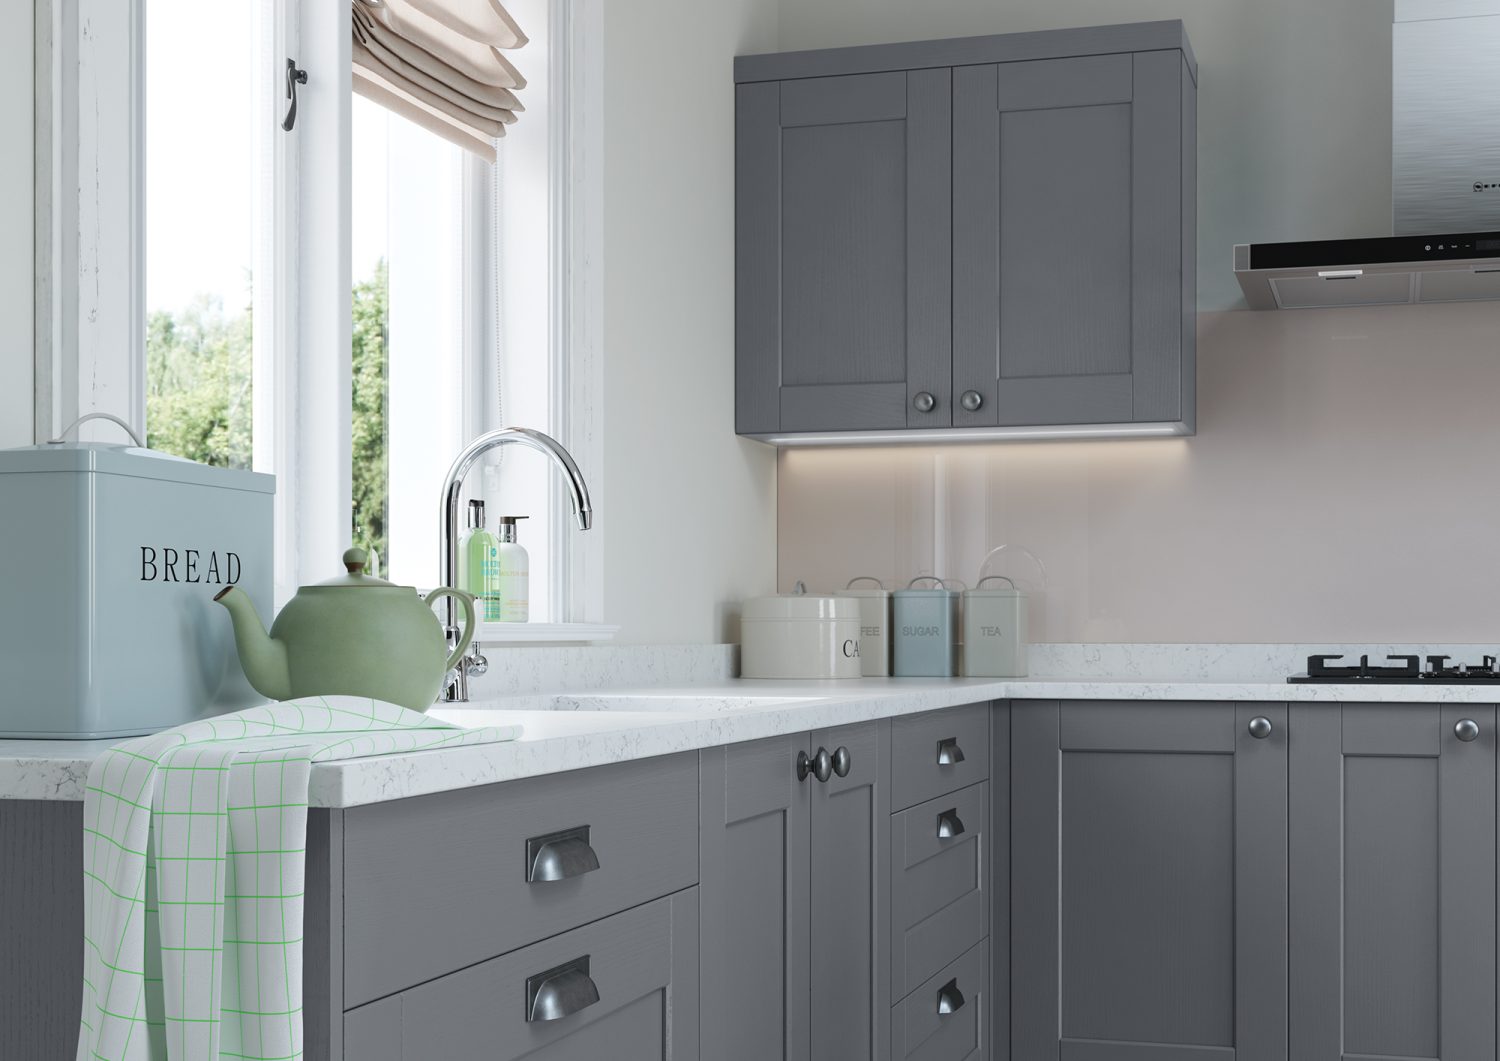 Kendal shaker kitchen cabinets in Dust Grey, made by The Kitchen Depot